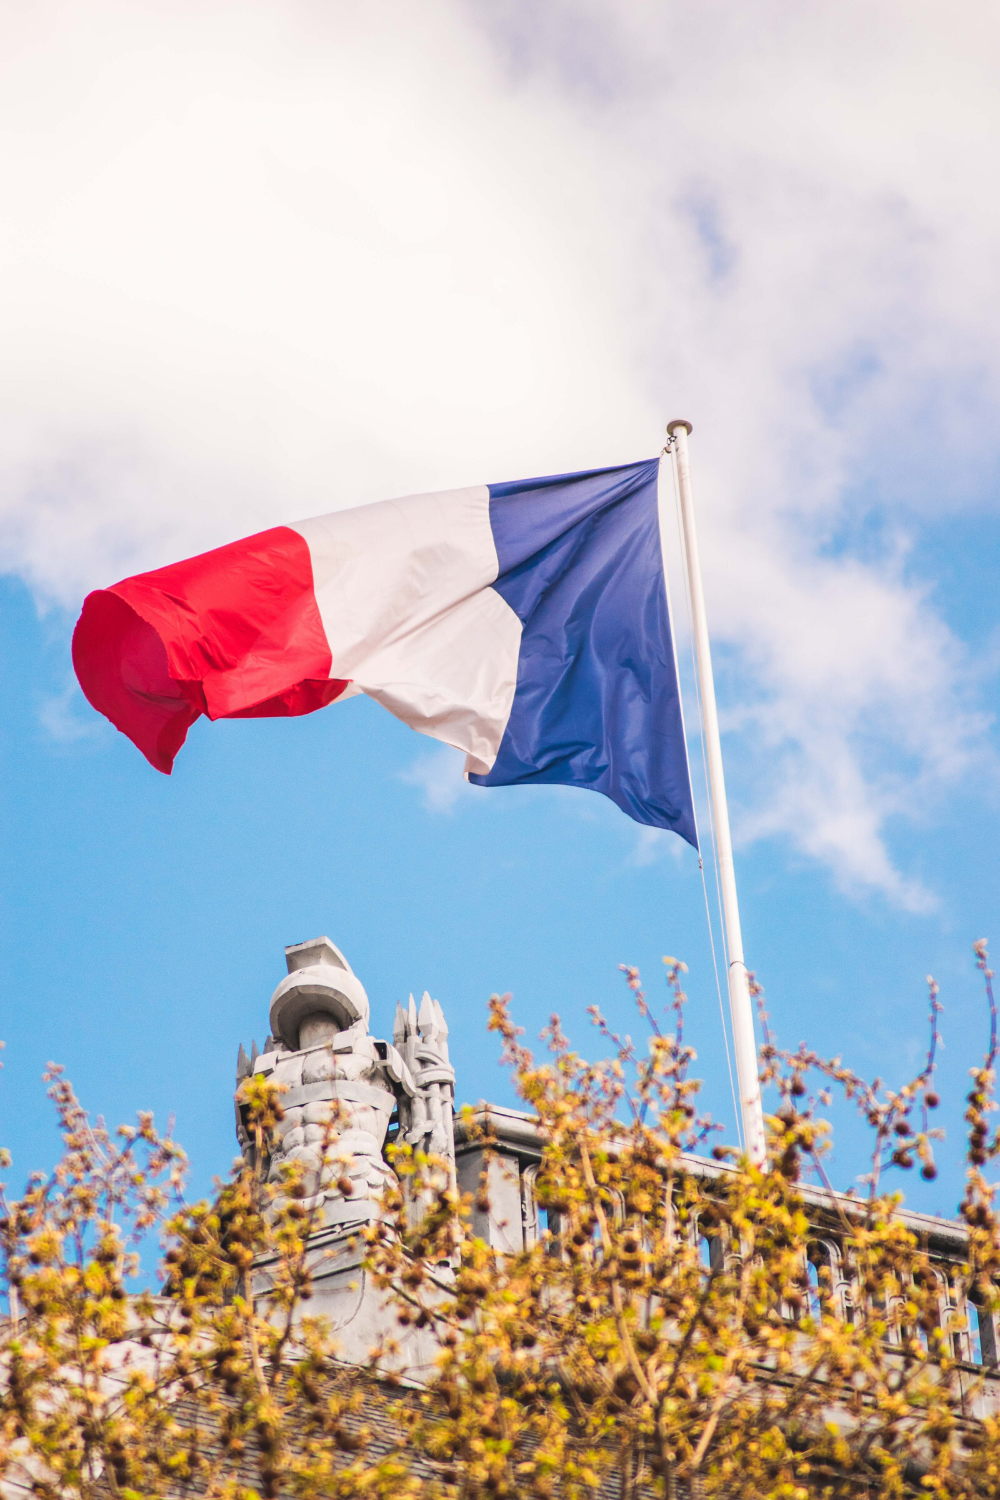 History and Culture in Pensacola - French Flag